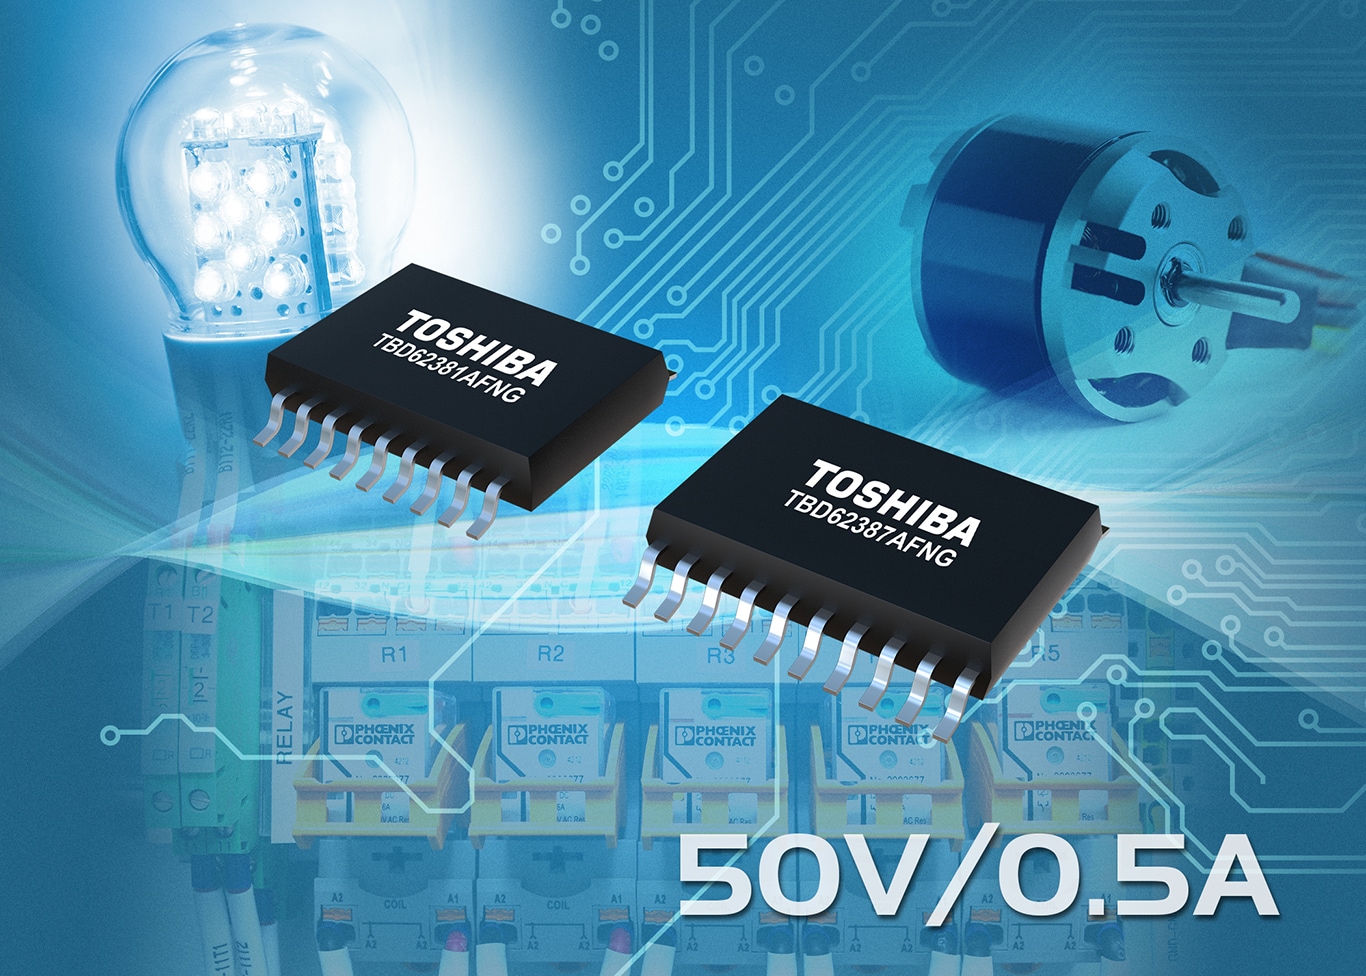 Toshiba Expands Line-up of New-generation Transistor Arrays